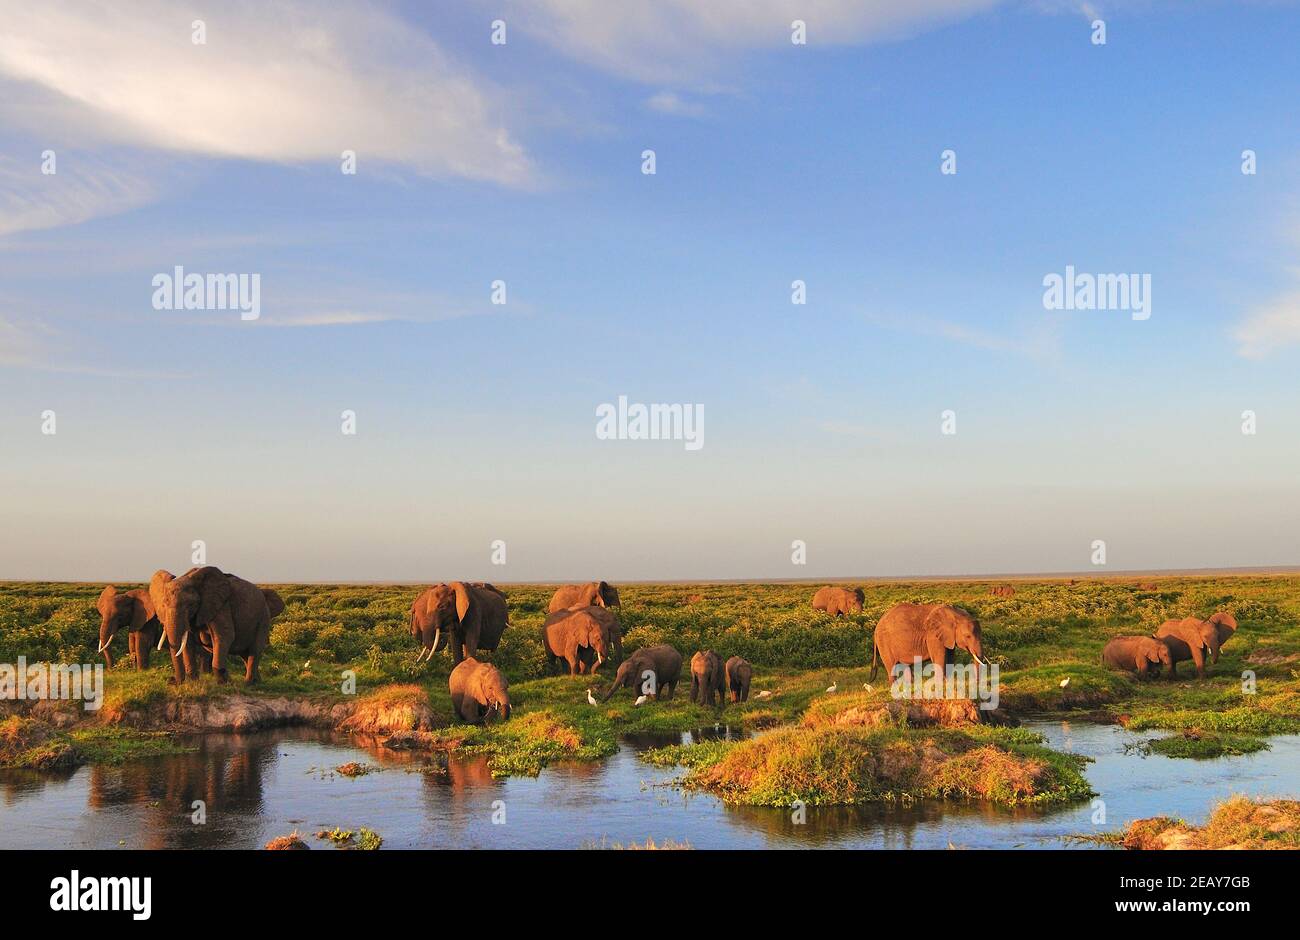 Herd of African elephants grazing and drinking from a river at sunset in Amboseli National Park, Kenya. Stock Photo